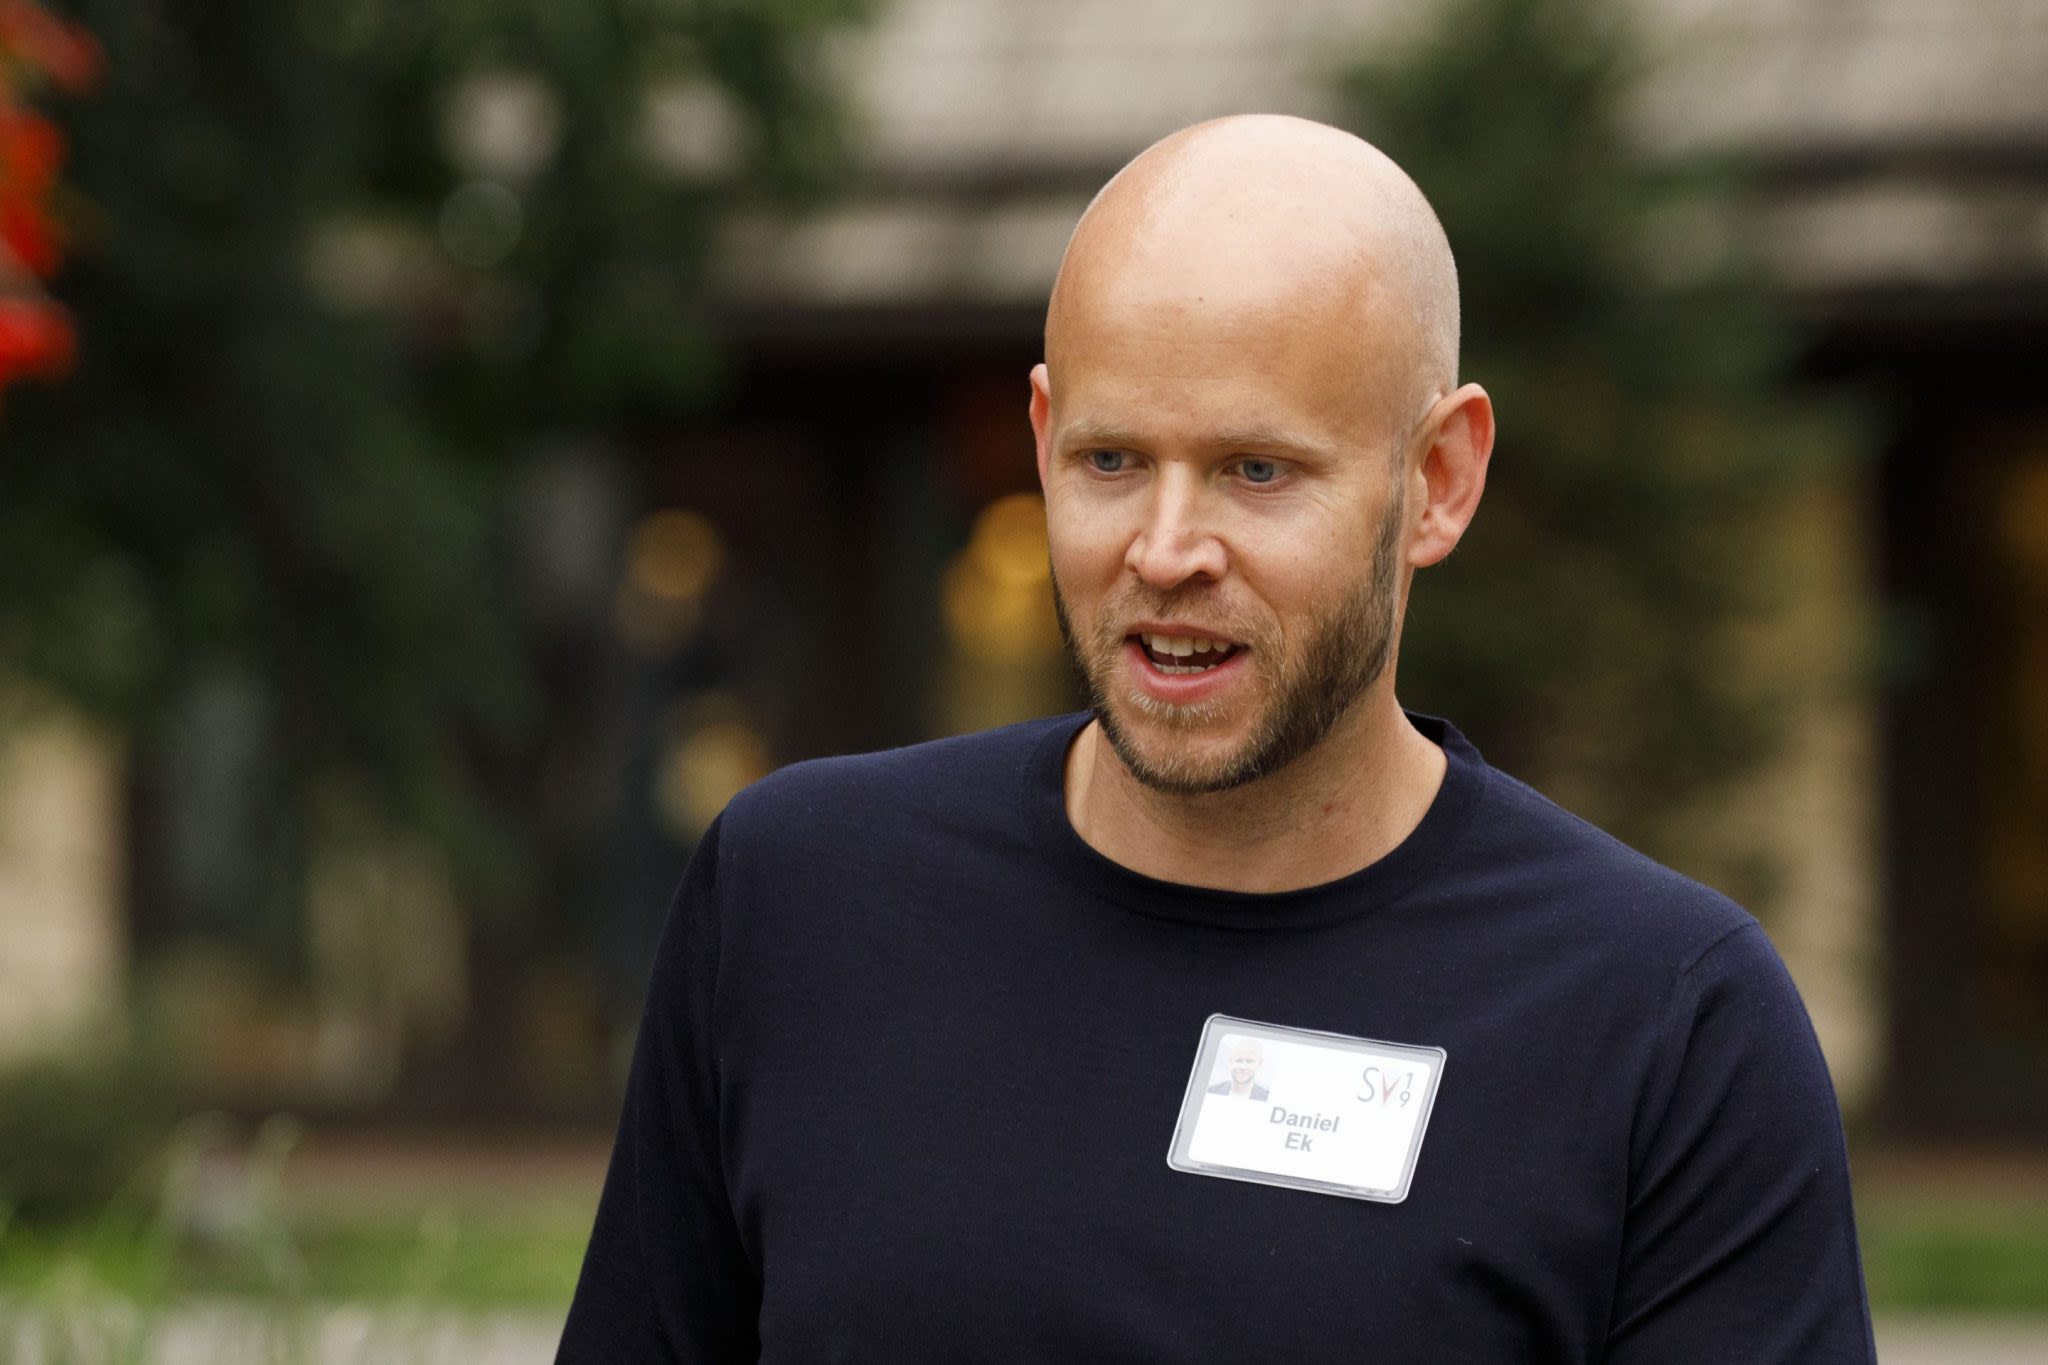 Spotify’s CEO got roasted by artists after he said the cost of creating content is ‘close to zero.’ Now he’s trying to walk back his ‘clumsy’ remark